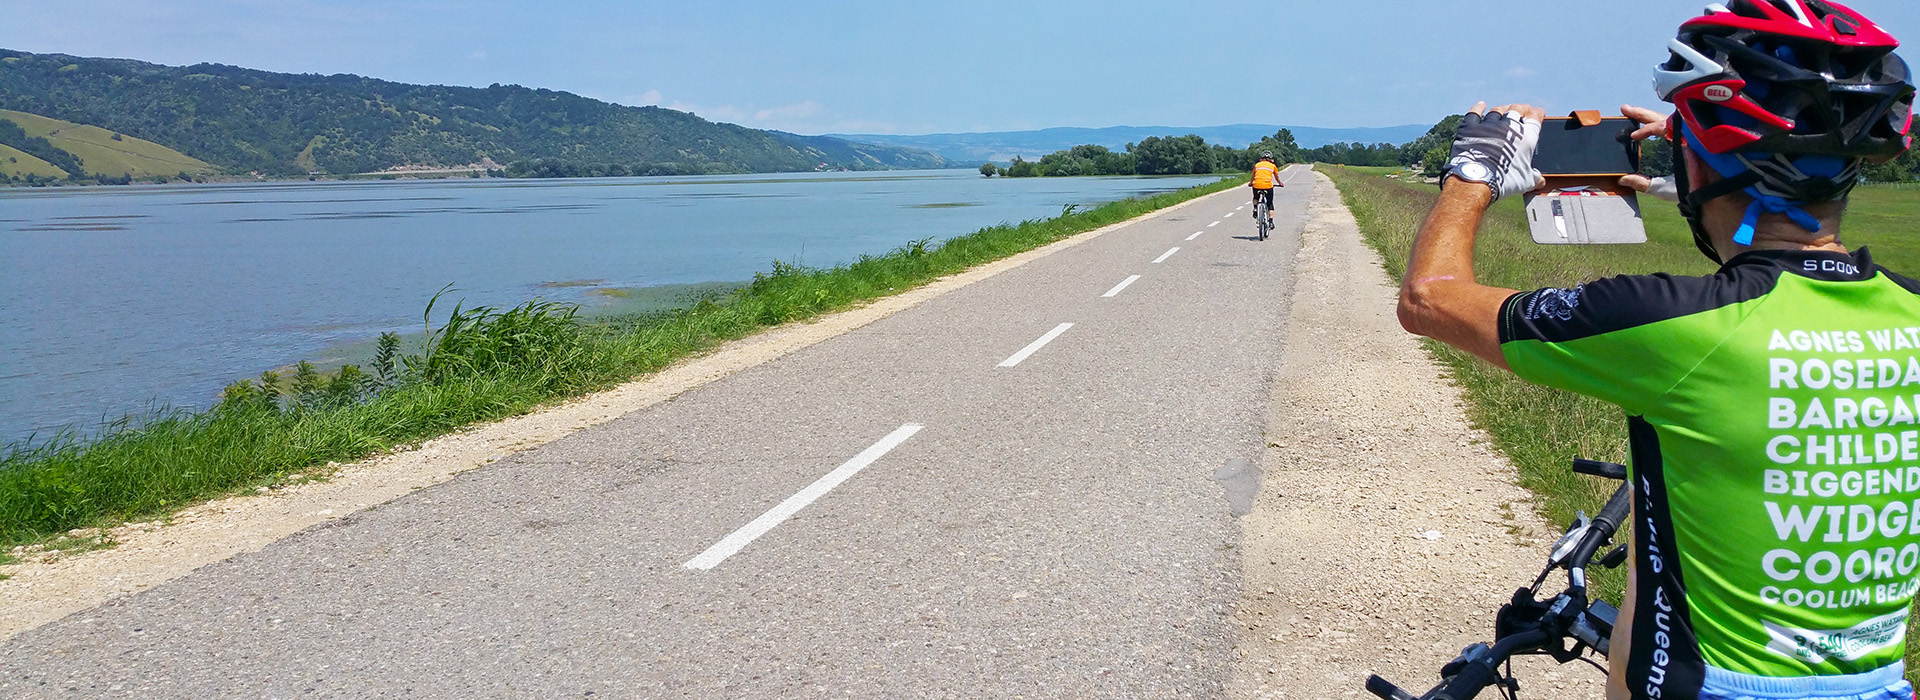 Danube Guided Cycling Holiday - Danube river